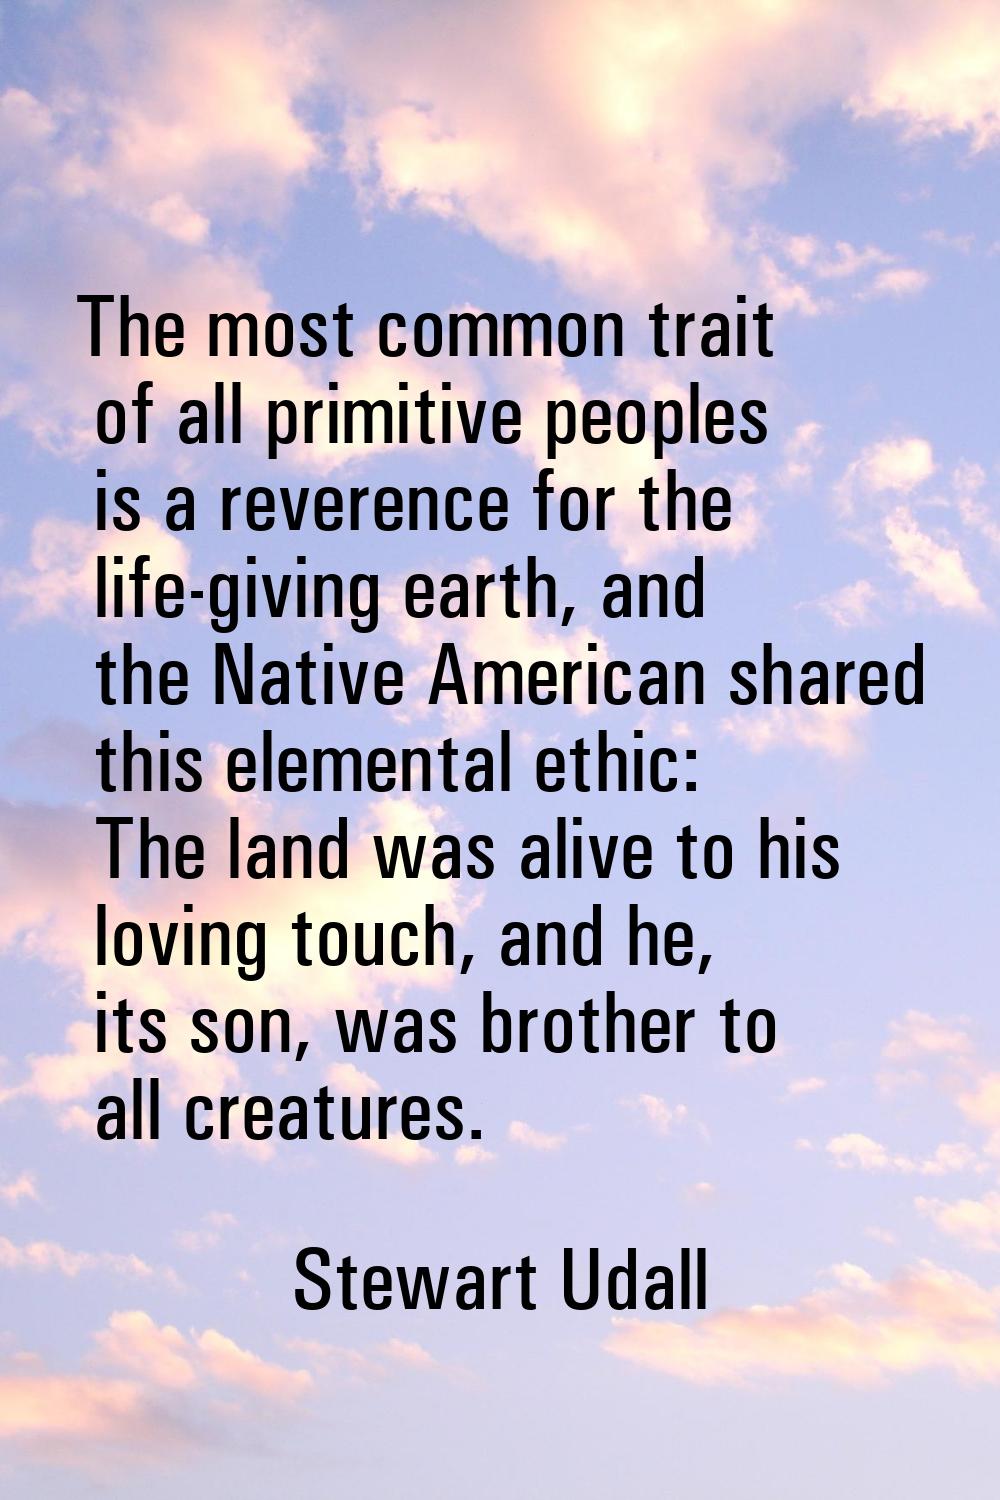 The most common trait of all primitive peoples is a reverence for the life-giving earth, and the Na